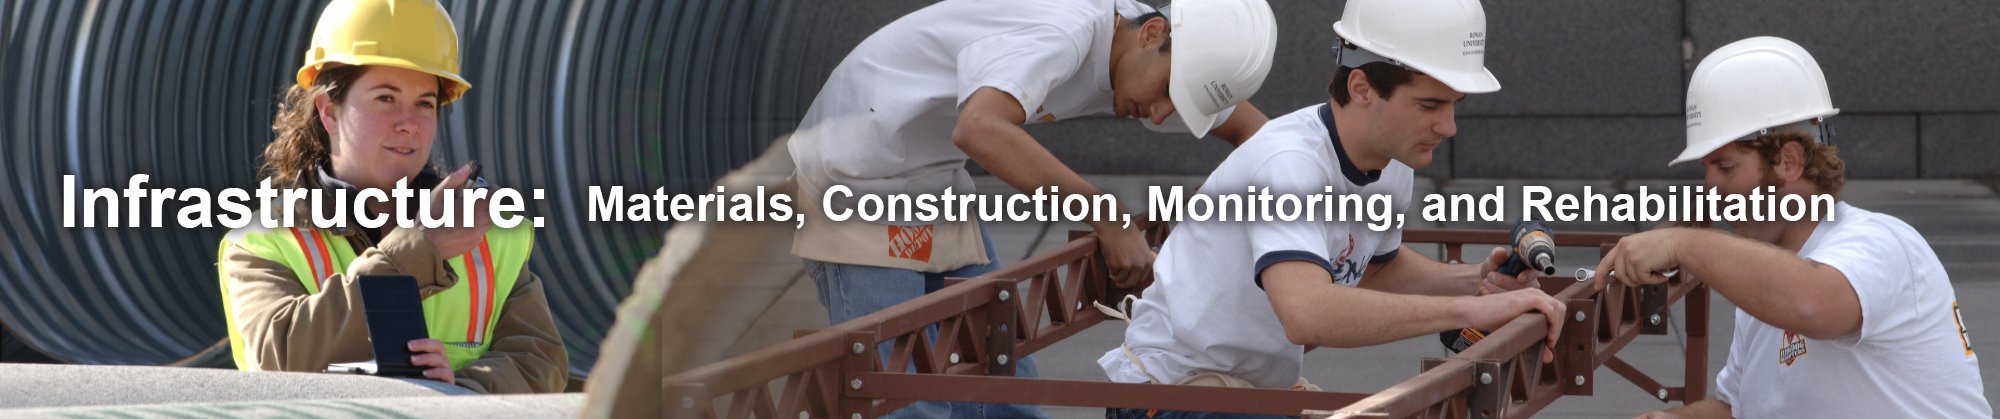 Infrastructure: Materials, Construction, Monitoring, and Rehabilitation